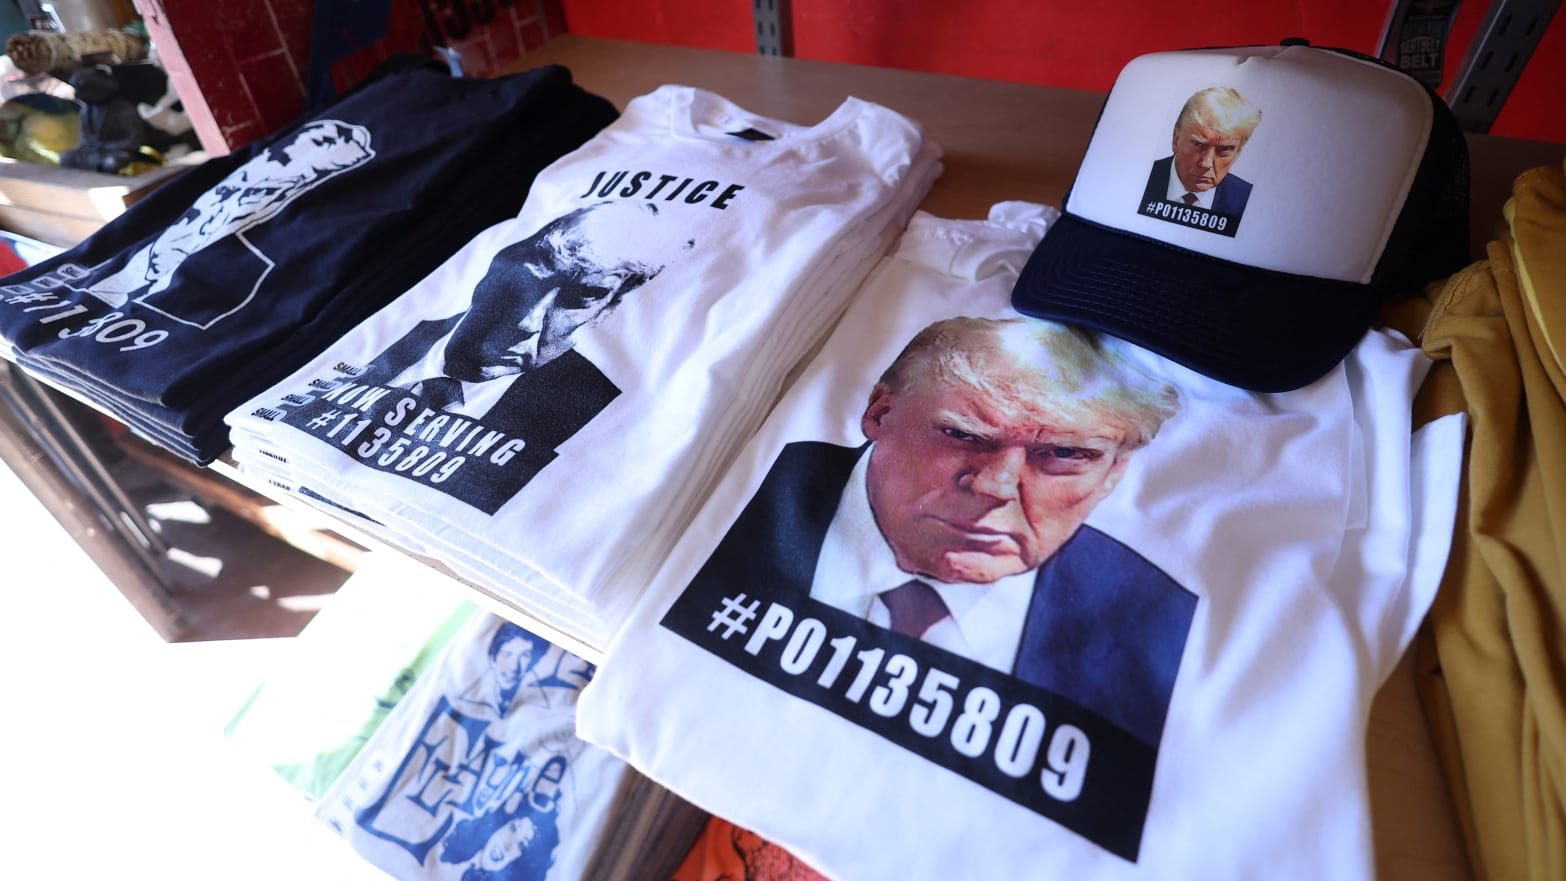 T-shirts and hats with an image depicting the mugshot of former U.S. President Donald Trump are pictured after being printed at the Y-Que printing store in Los Angeles